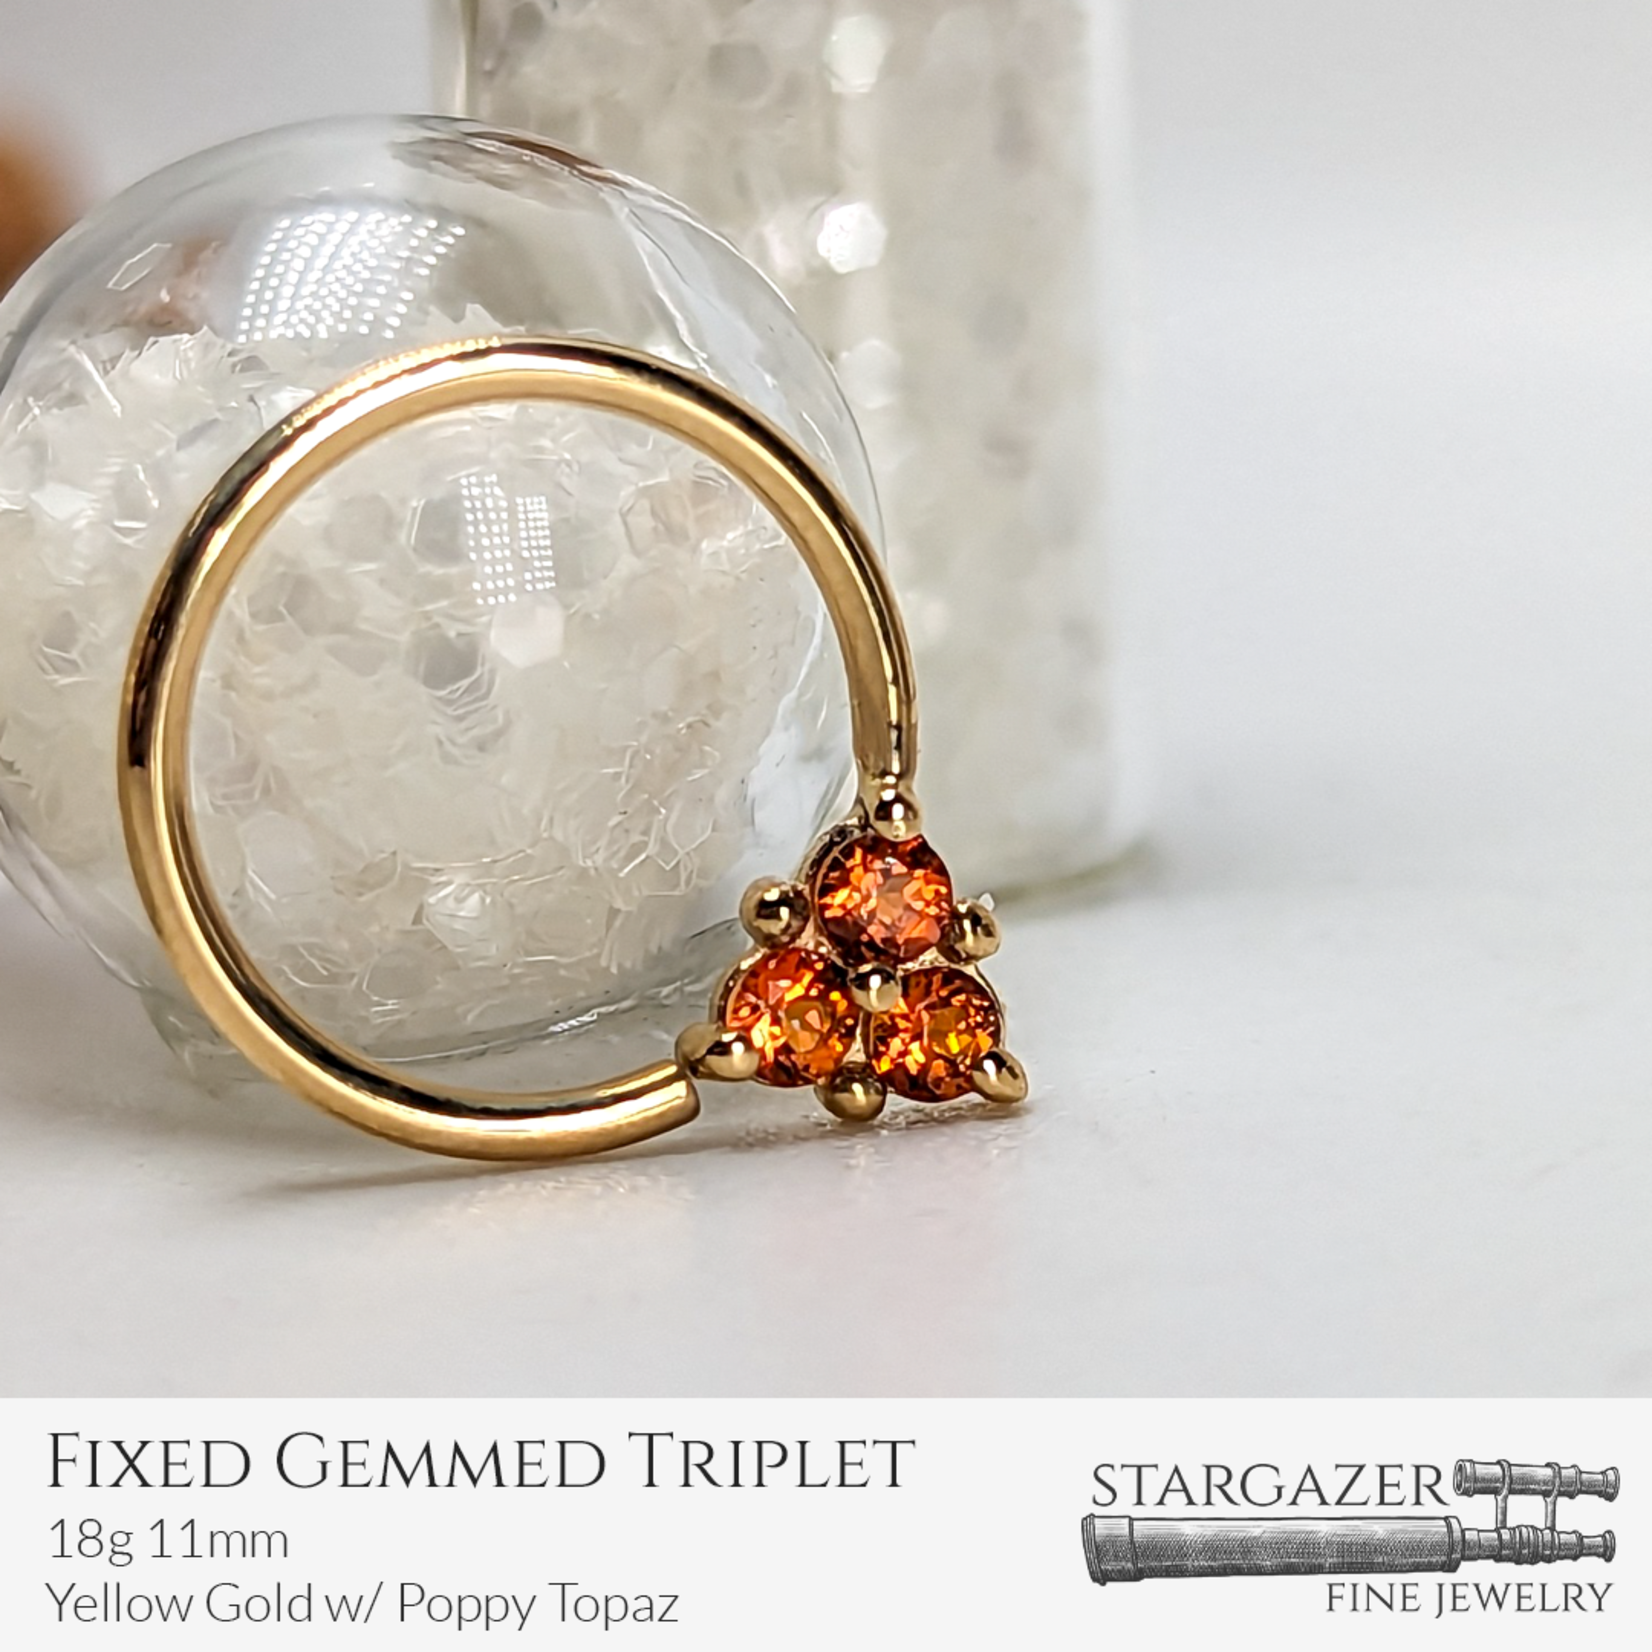 Fixed Gemmed Triplet 18g 11mm; Yellow Gold with Poppy Topaz